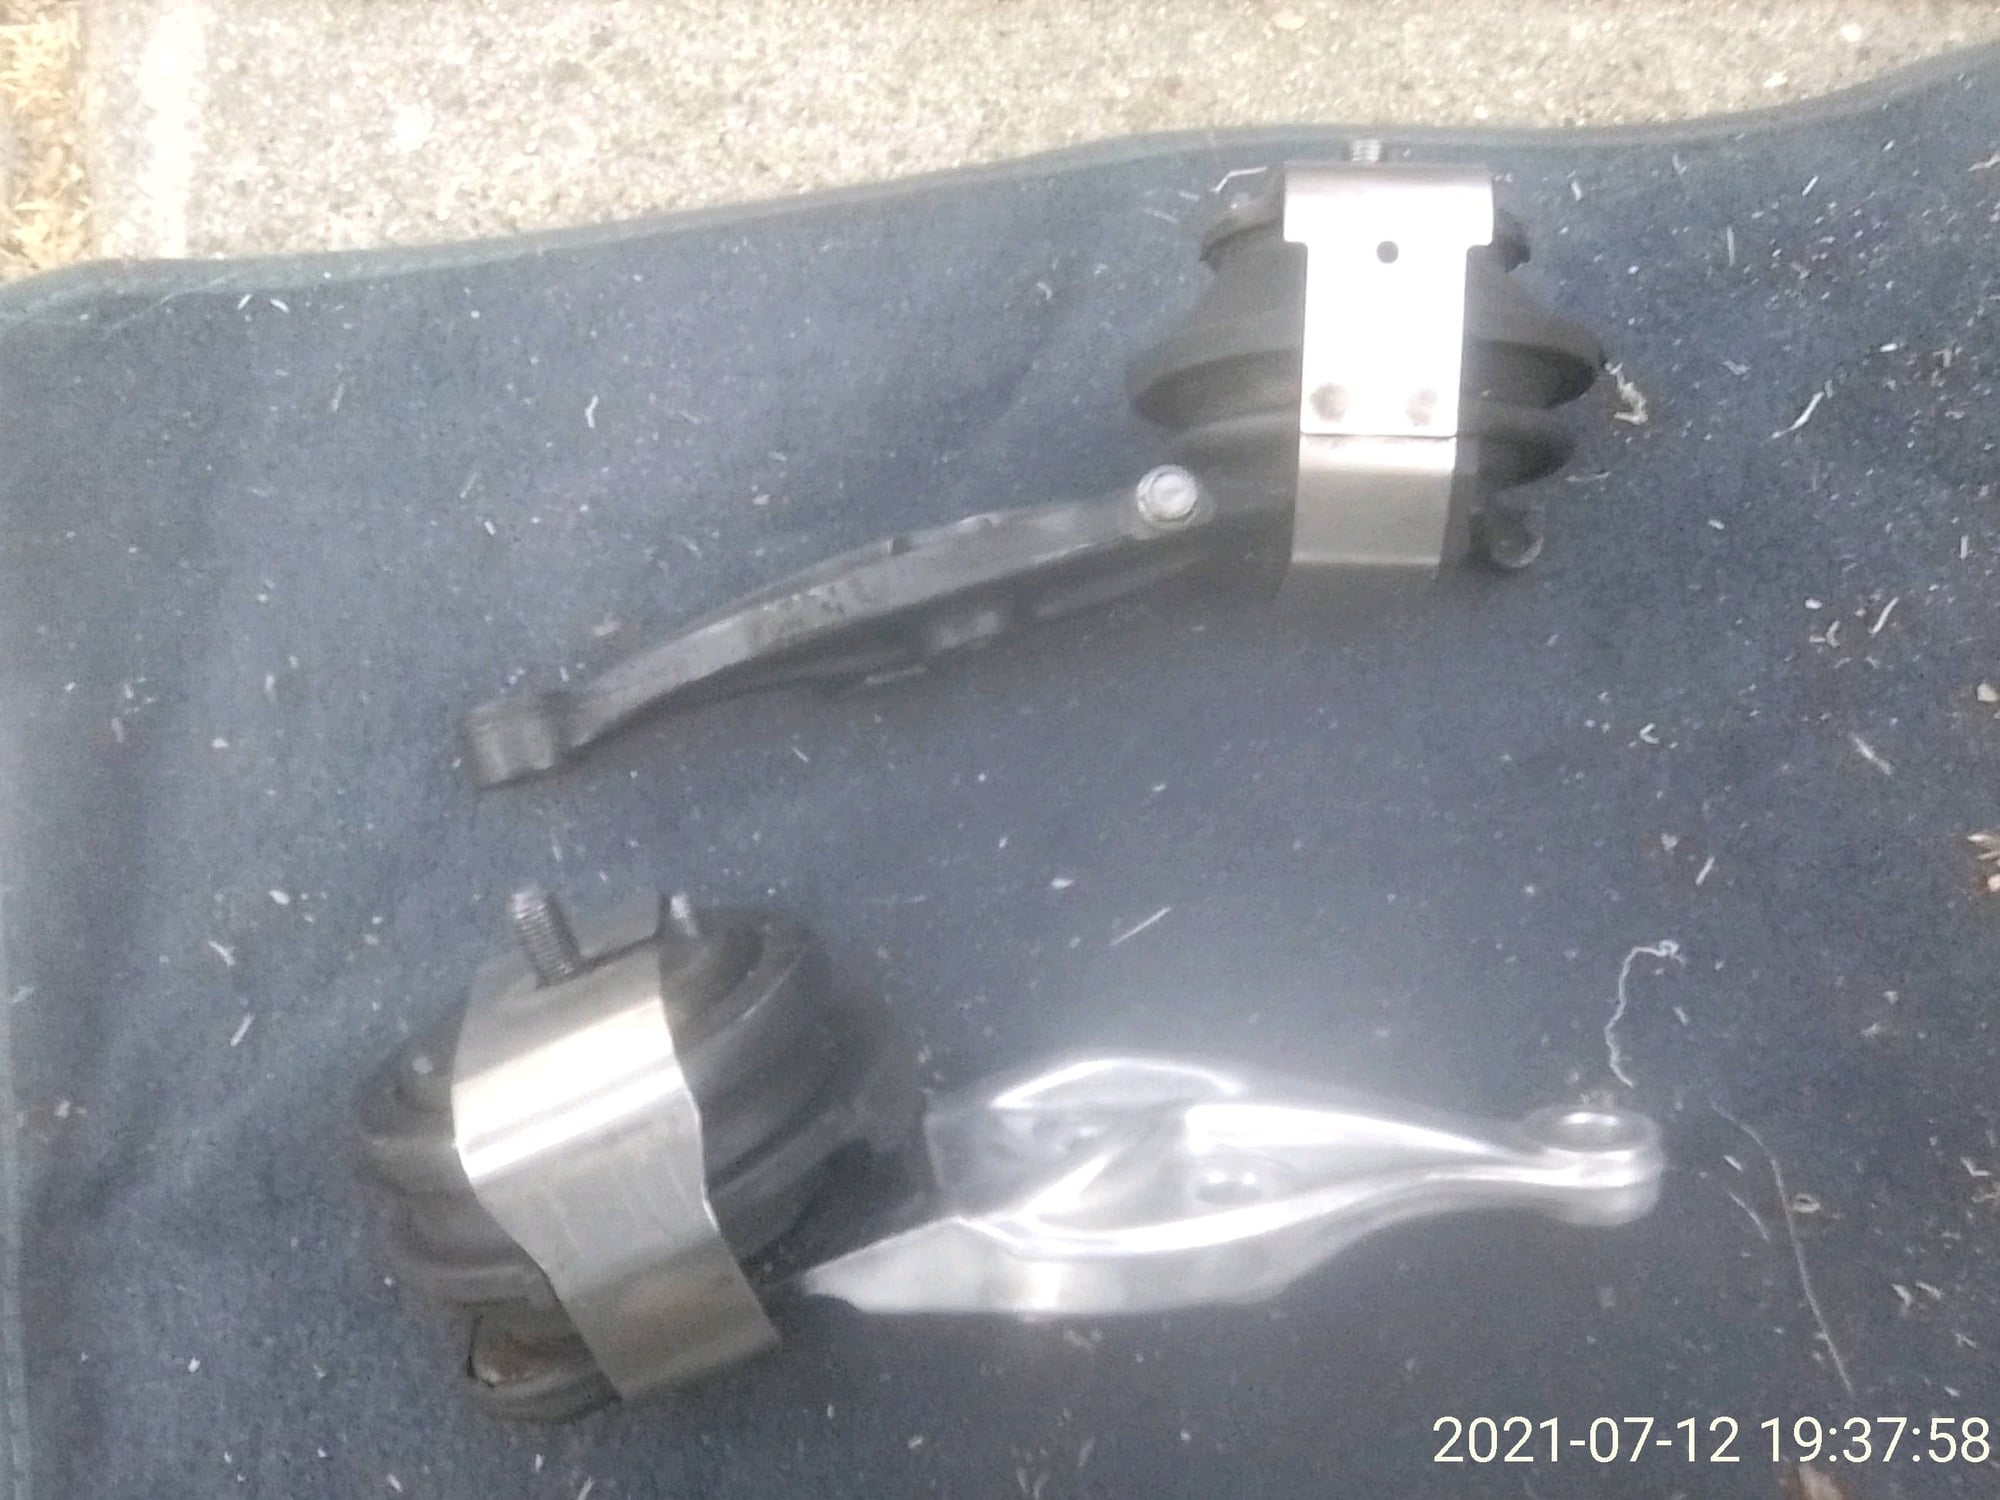 Miscellaneous - FD - OEM L & R Motor Mounts - Used - 1993 to 1995 Mazda RX-7 - San Jose, CA 95121, United States